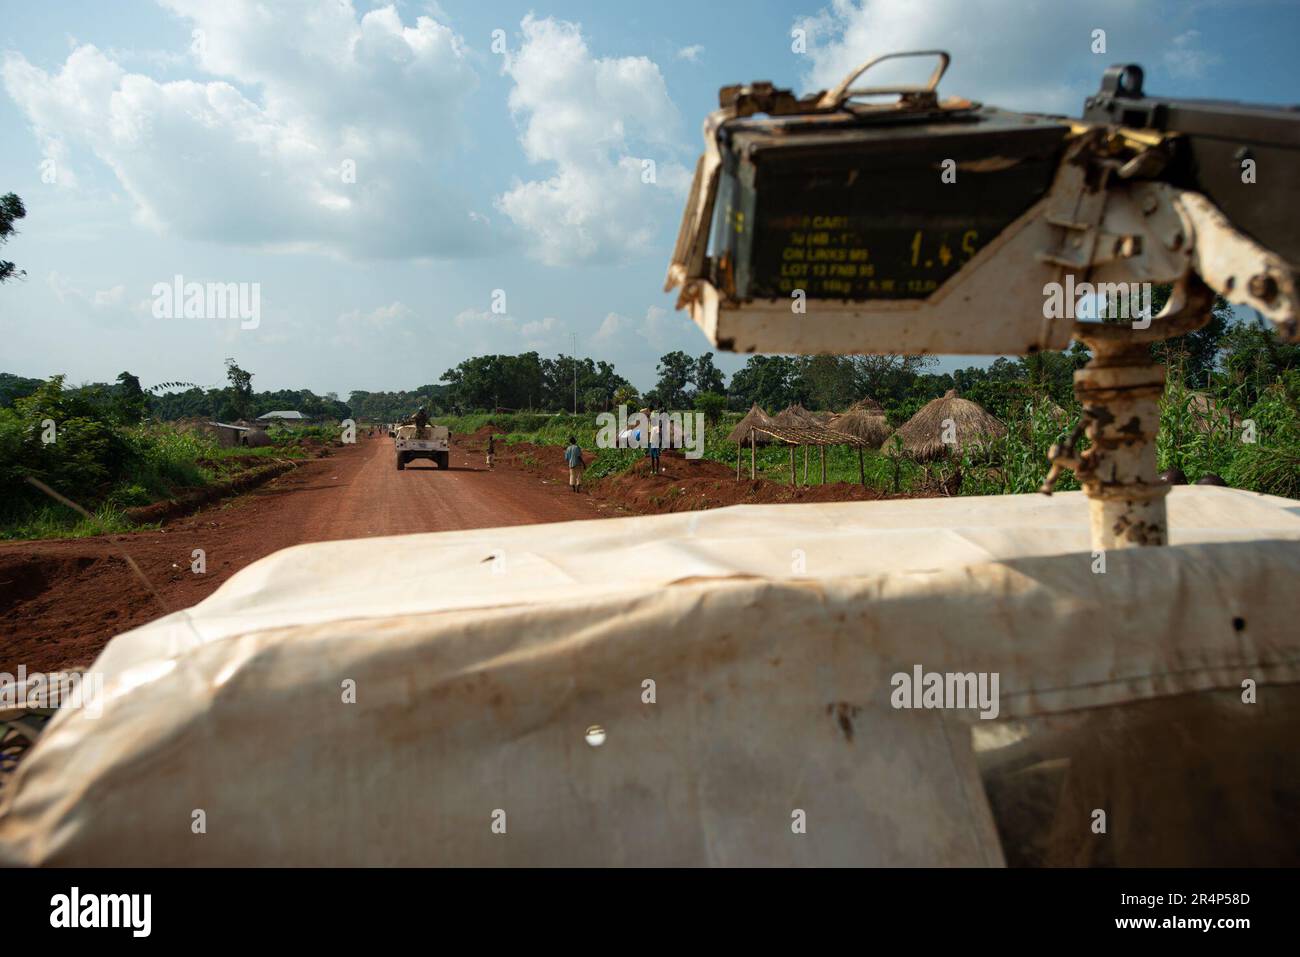 A United Nations peacekeeping convoy operates on a dirt road in DRC, near Dura.  The 0.50 calibre M2 Browning machine gun is armed with live rounds, and operated by military personnel from the Moroccan army Stock Photo